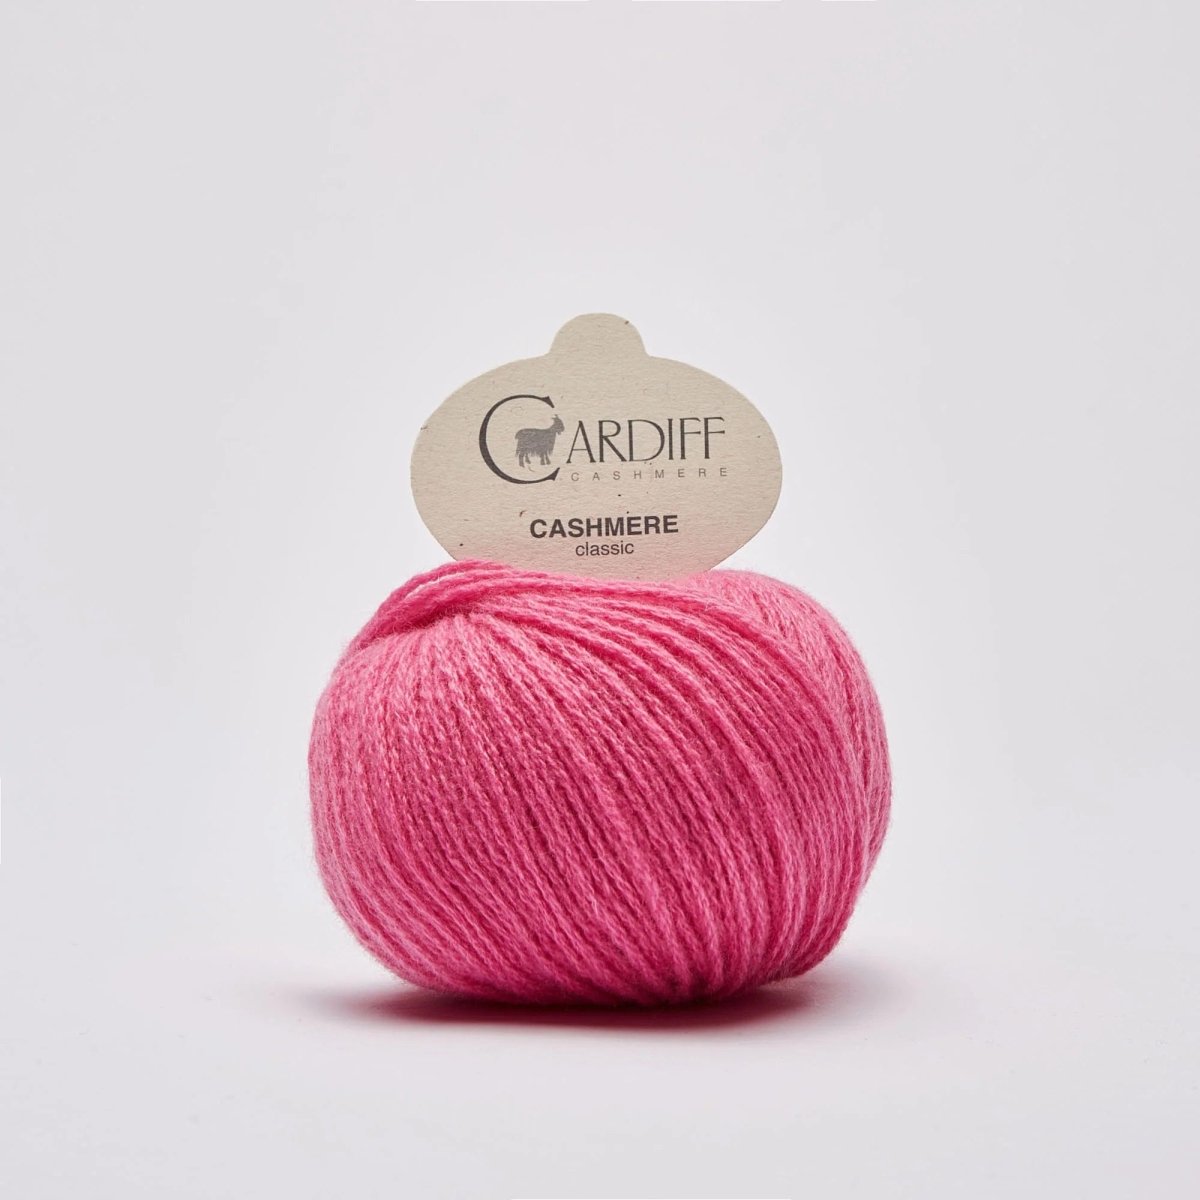 CASHMERE CLASSIC 662-Marilyn - Cardiff Cashmere